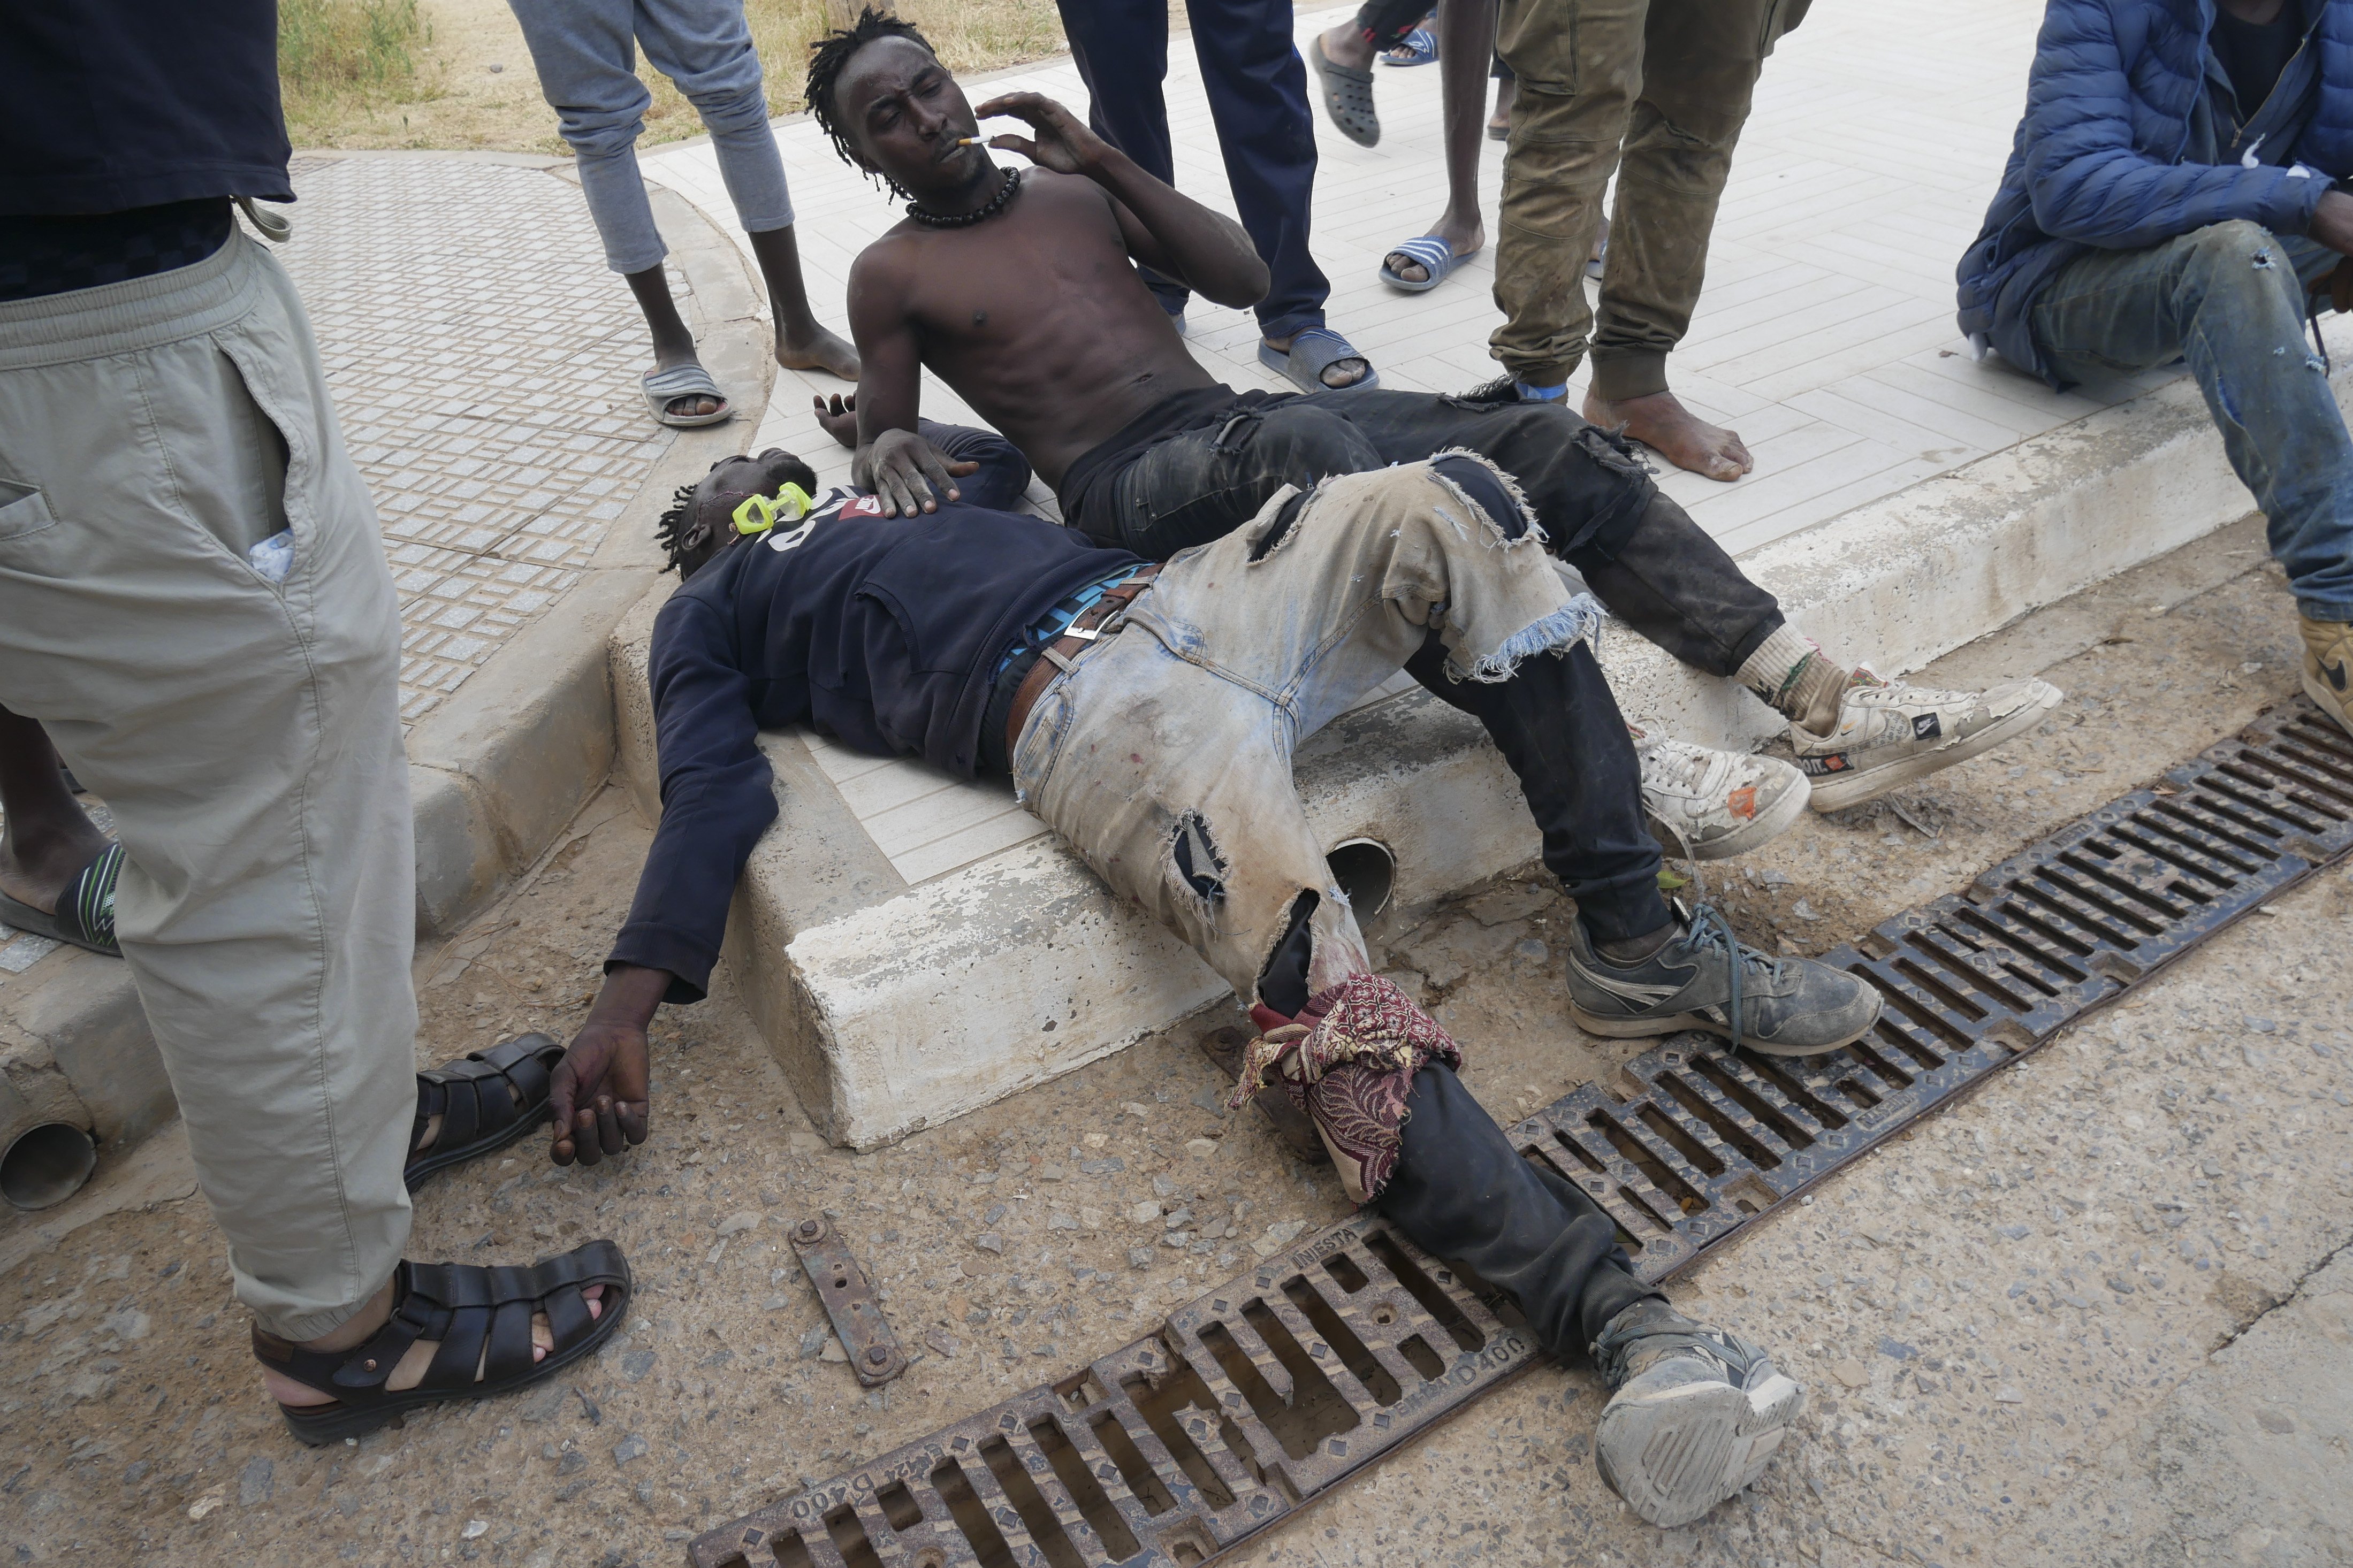 Ombudsman critical of Spanish role in Melilla migrant deaths: risk was "foreseeable"